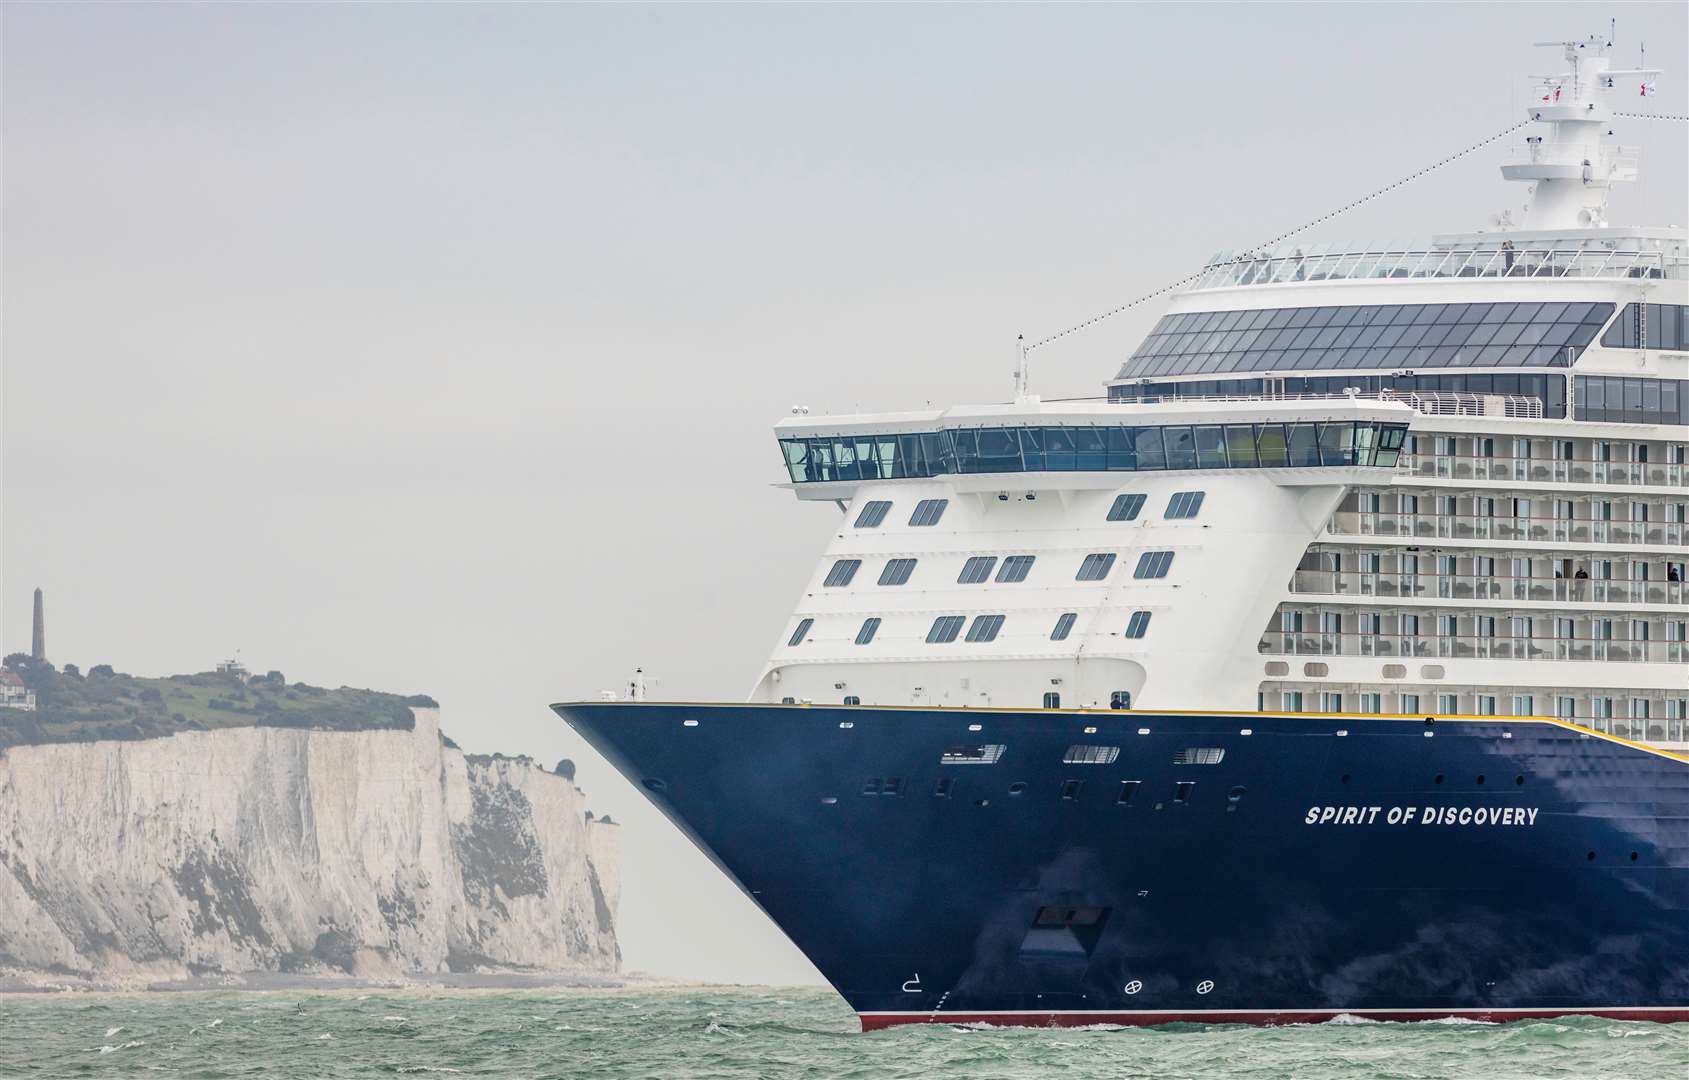 Saga’s cruise business exceeded expectations last year